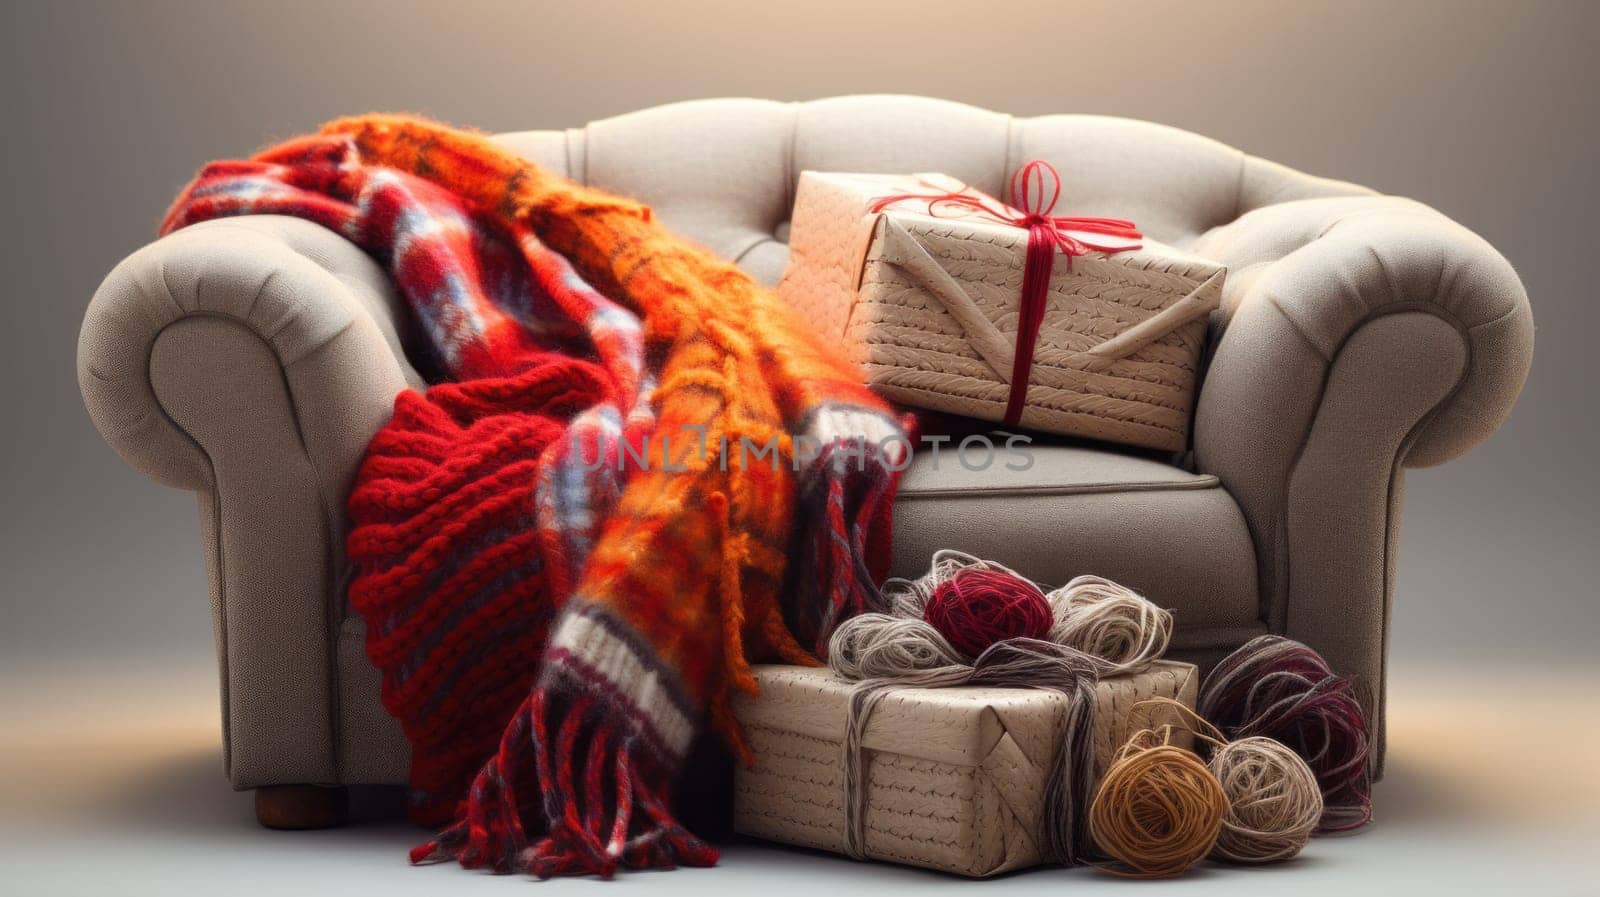 A chair with a blanket and presents on it next to yarn